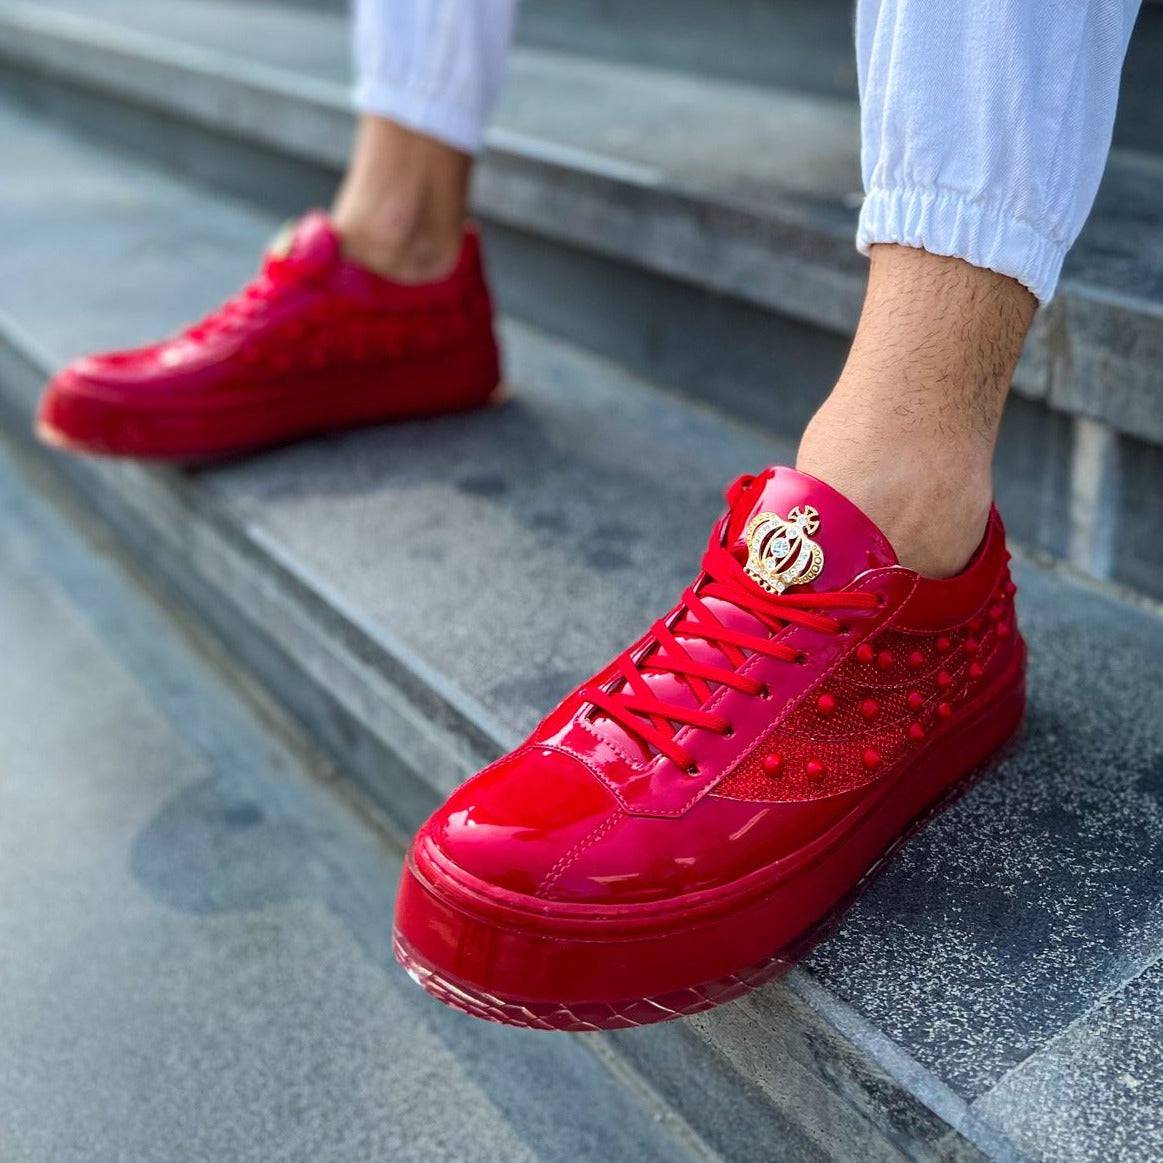 Men's Royal X Low Top in All Red